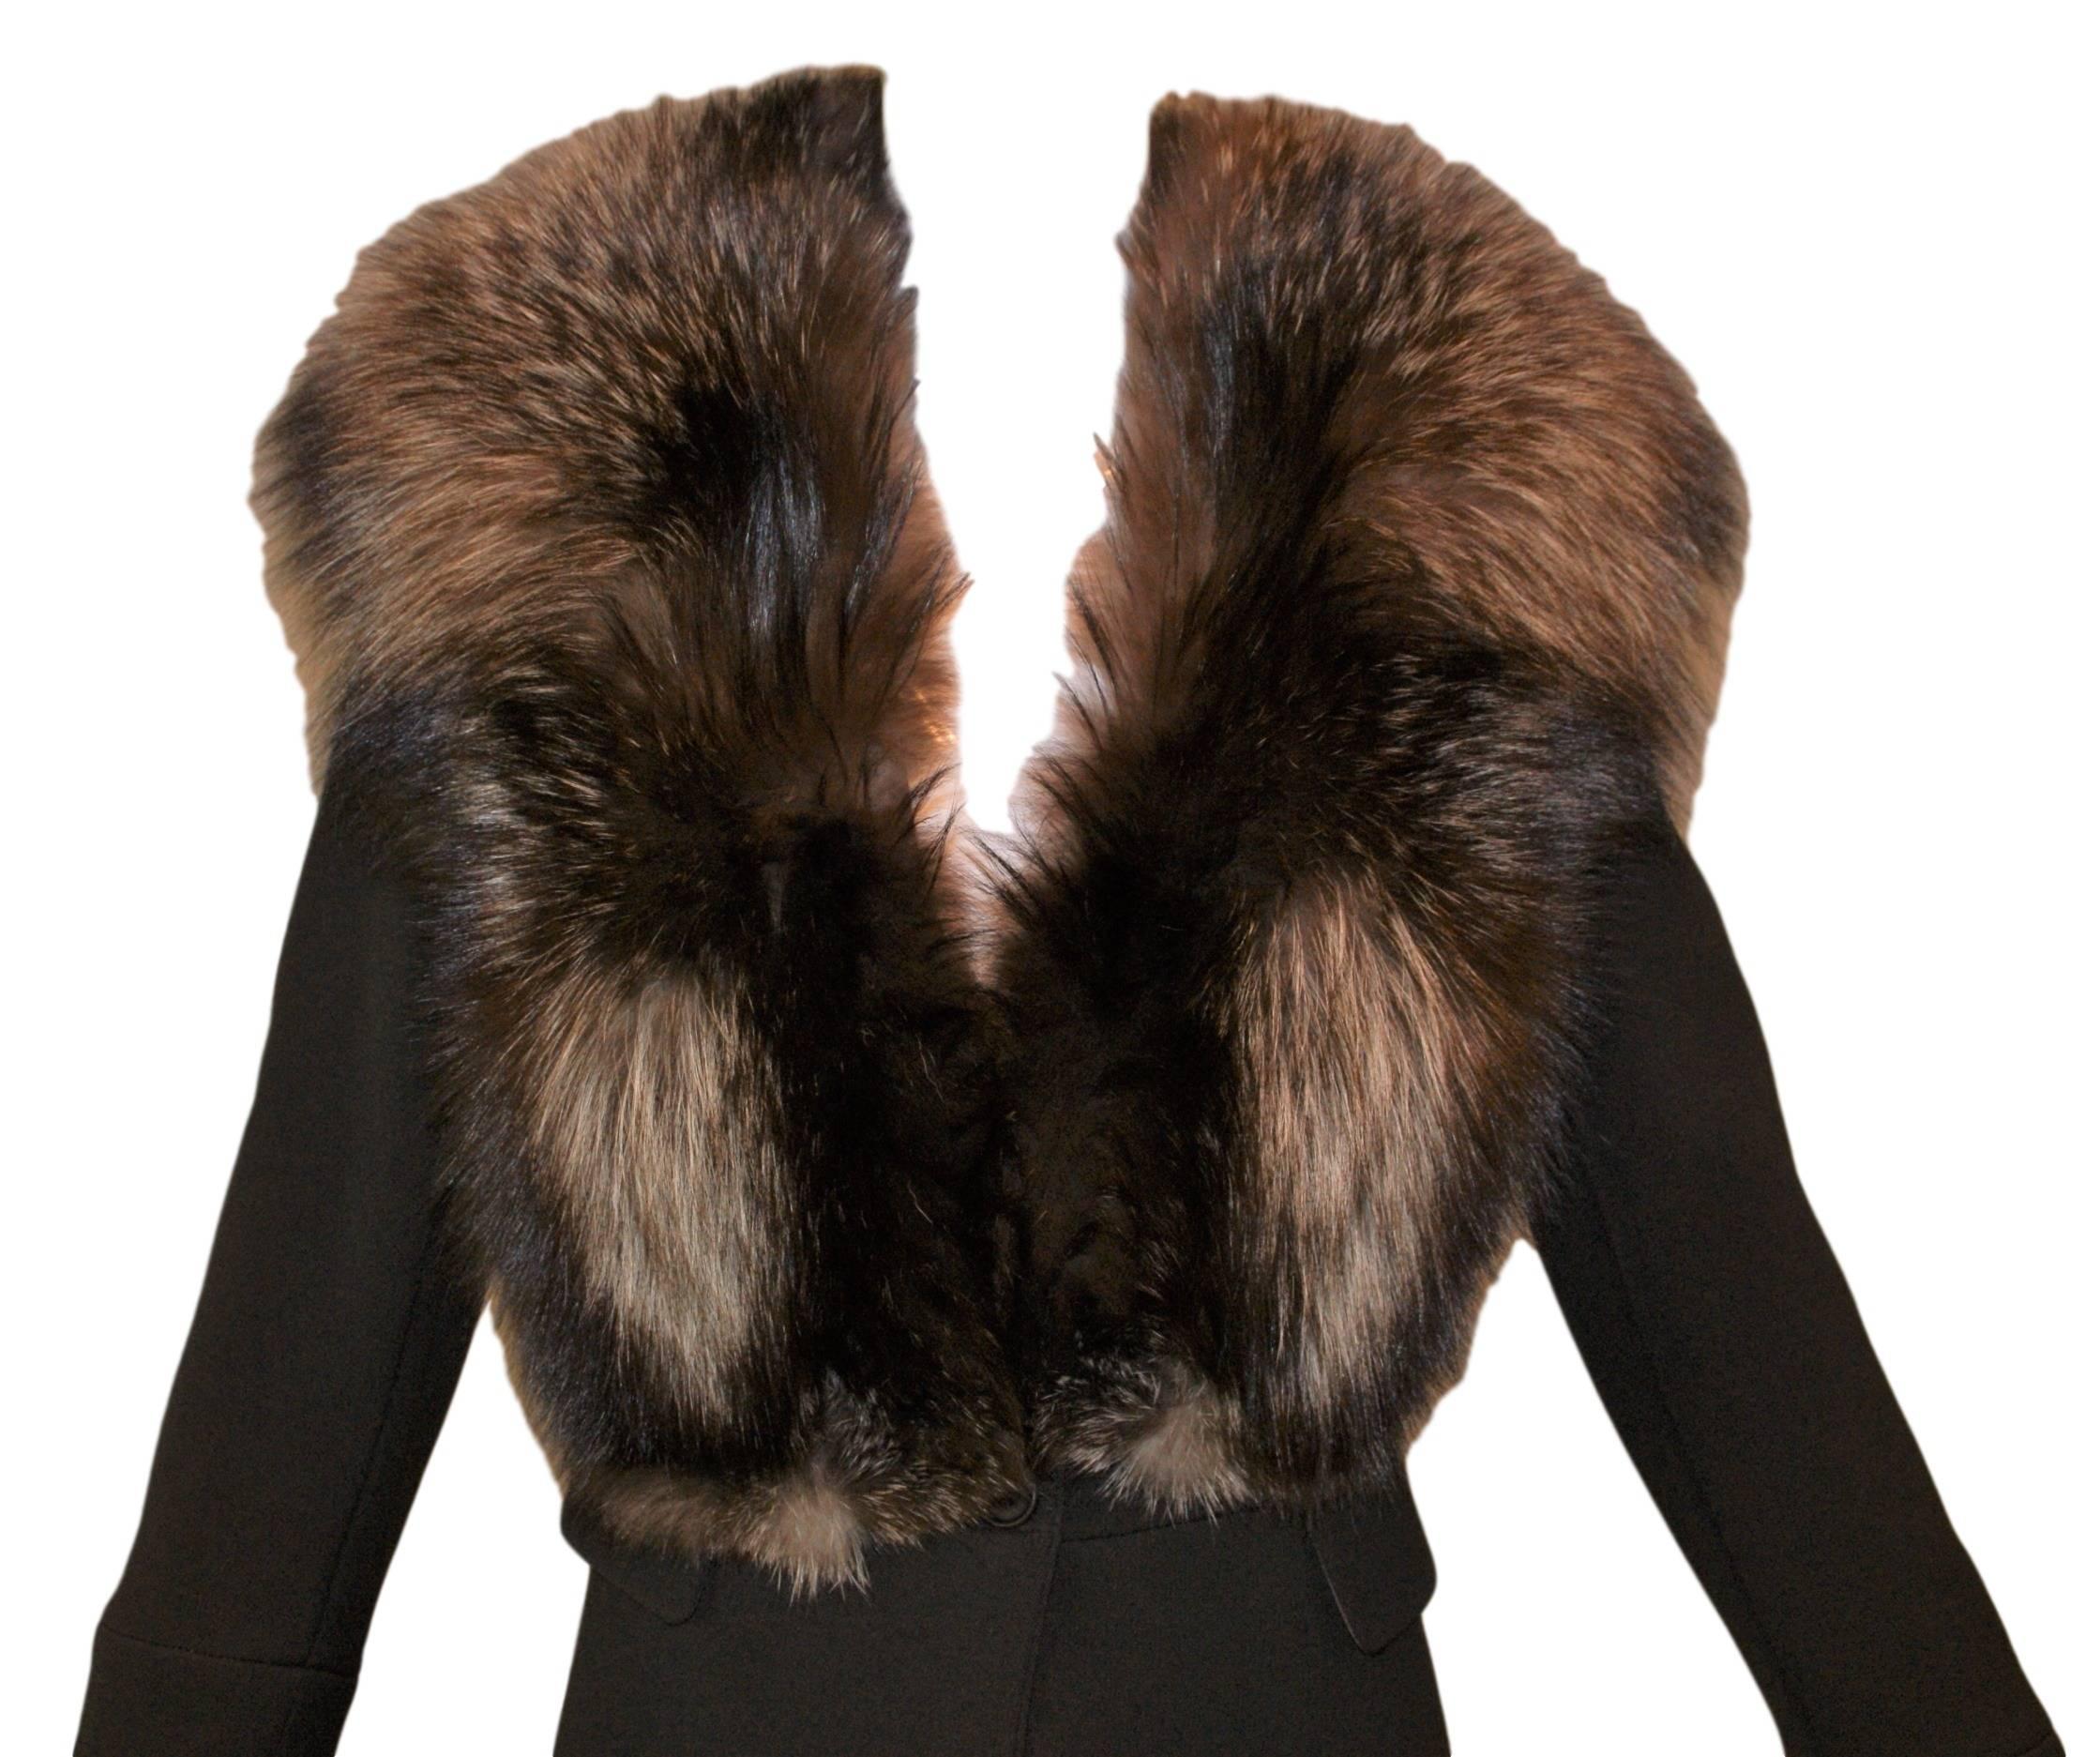 DESIGNER: F/W 2000 Alexander McQueen  

Please contact for more information and/or photos.

CONDITION: Excellent

MATERIAL: Wool & Fox fur

COUNTRY MADE: Italy

SIZE: 38- runs very small, similar to an XXS to XS.

MEASUREMENTS;